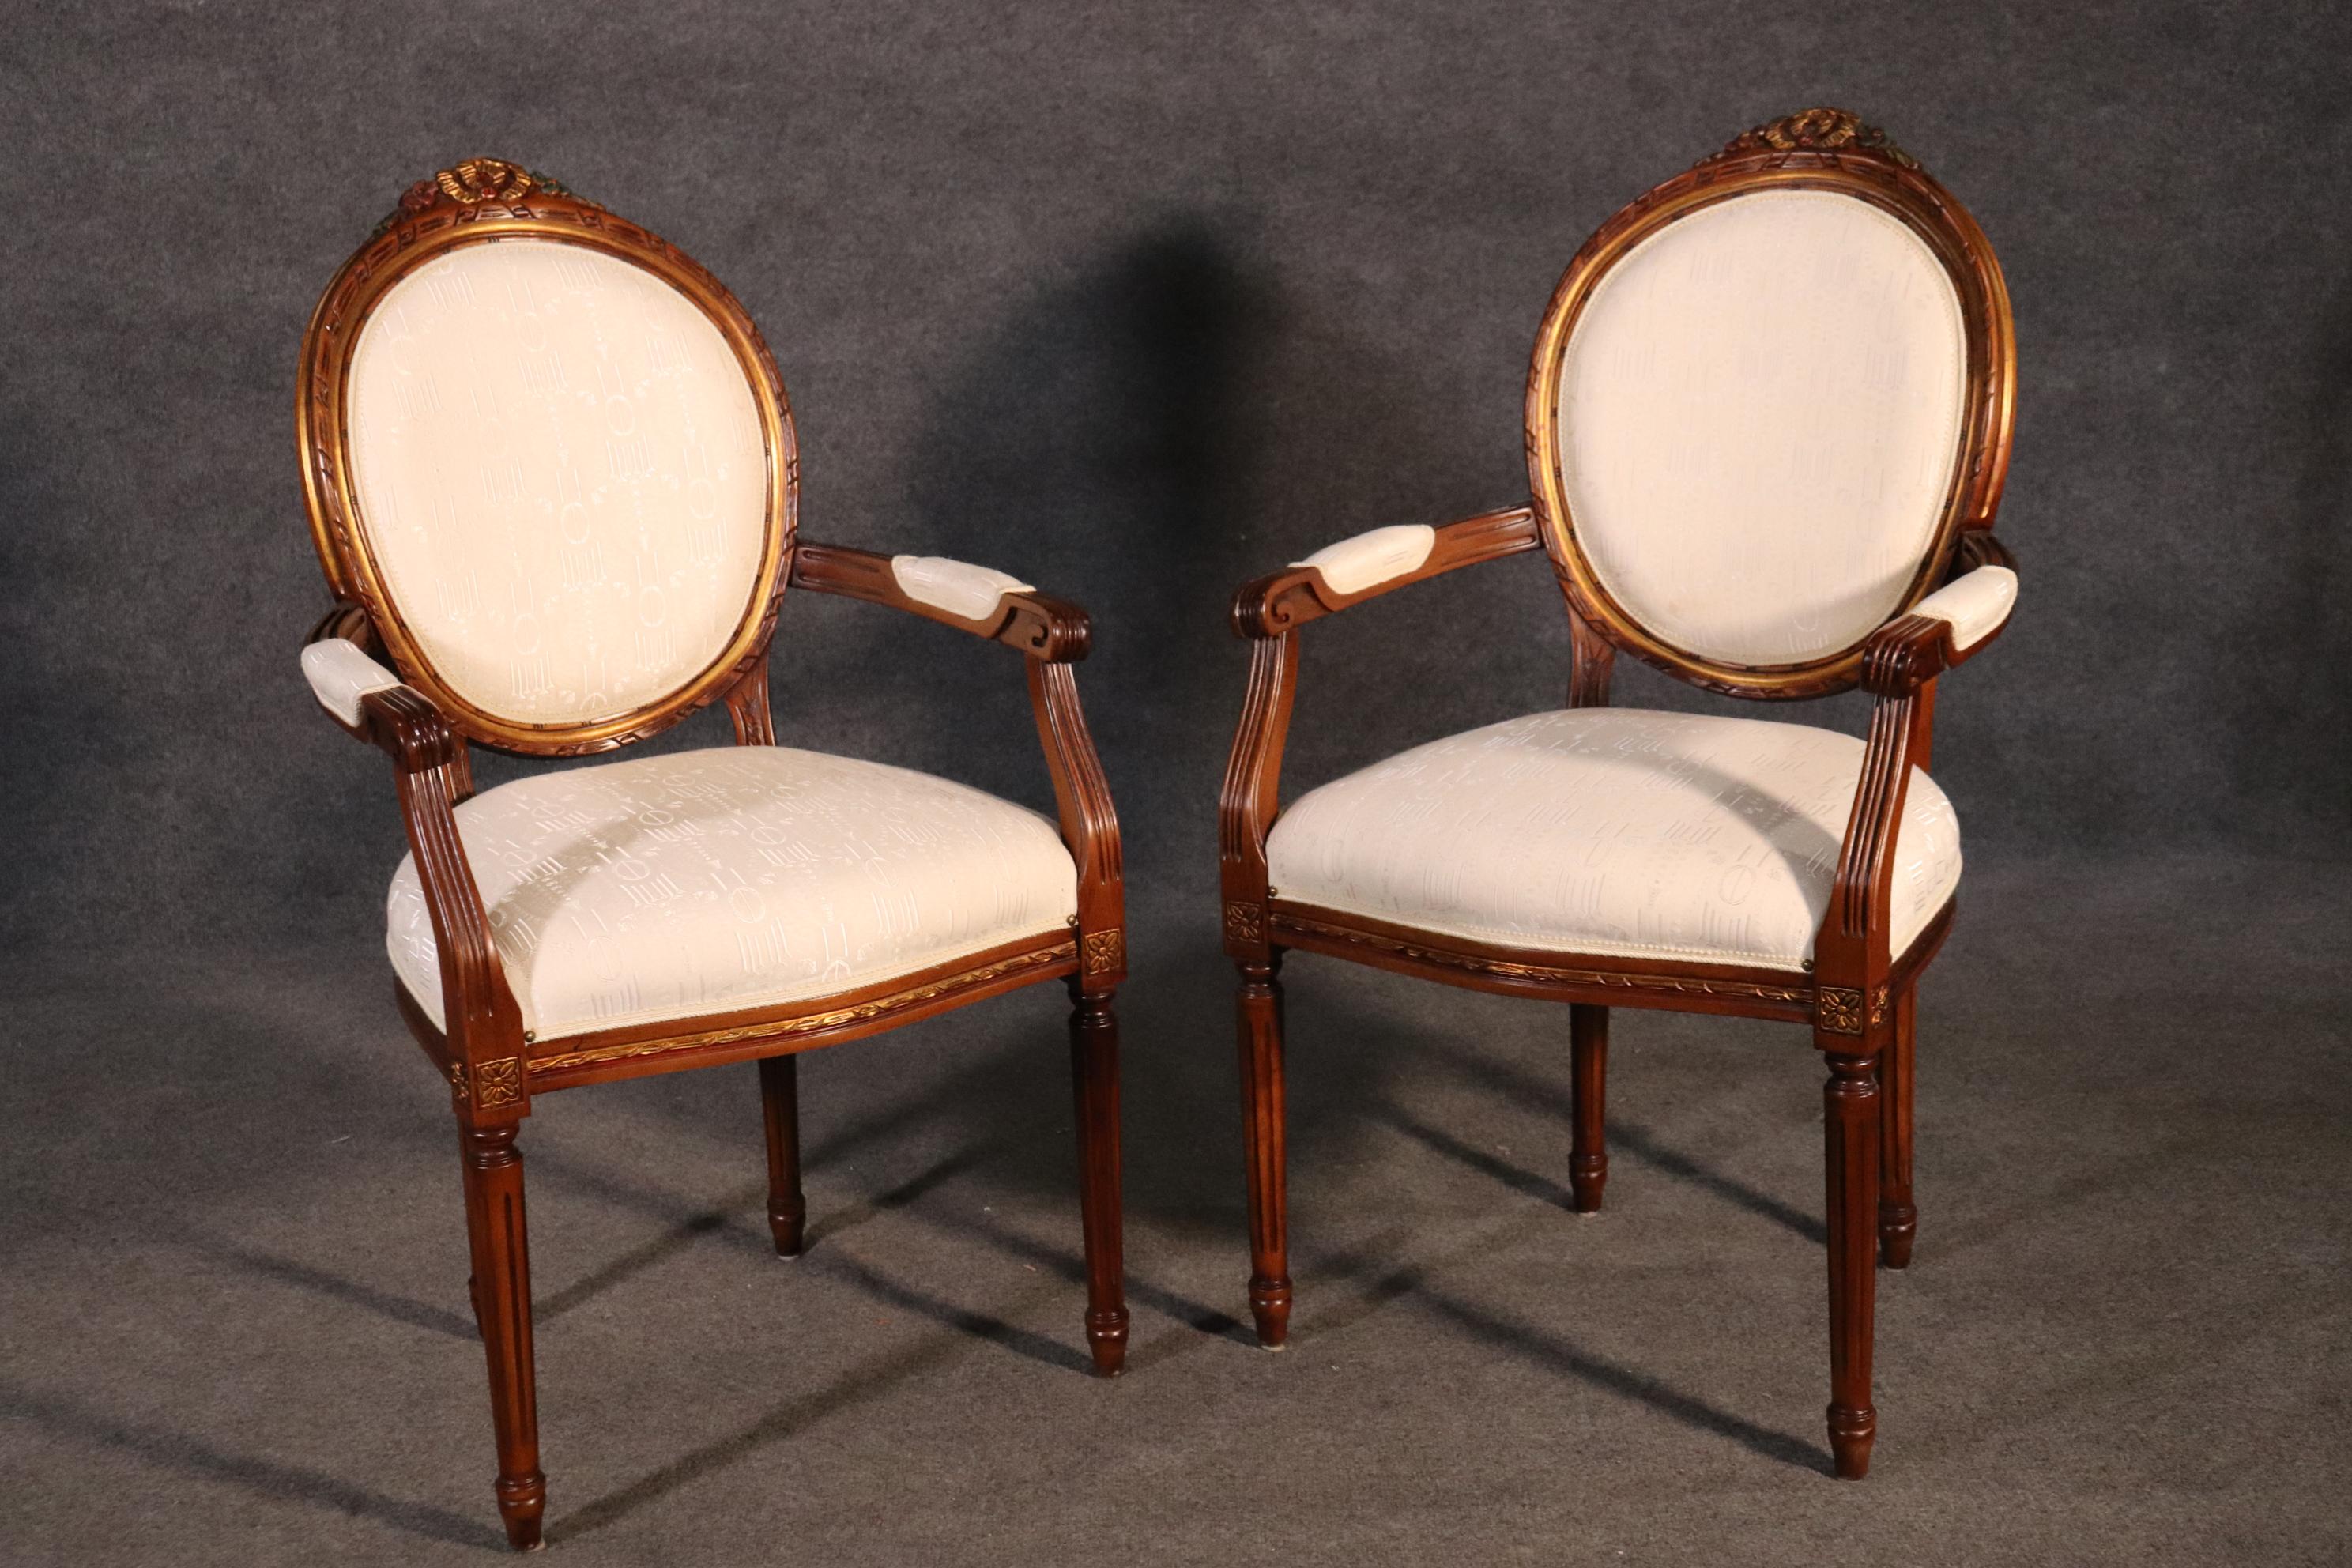 This is an outstanding high quality Italian set of 12 dining chairs. The chairs are labeled 